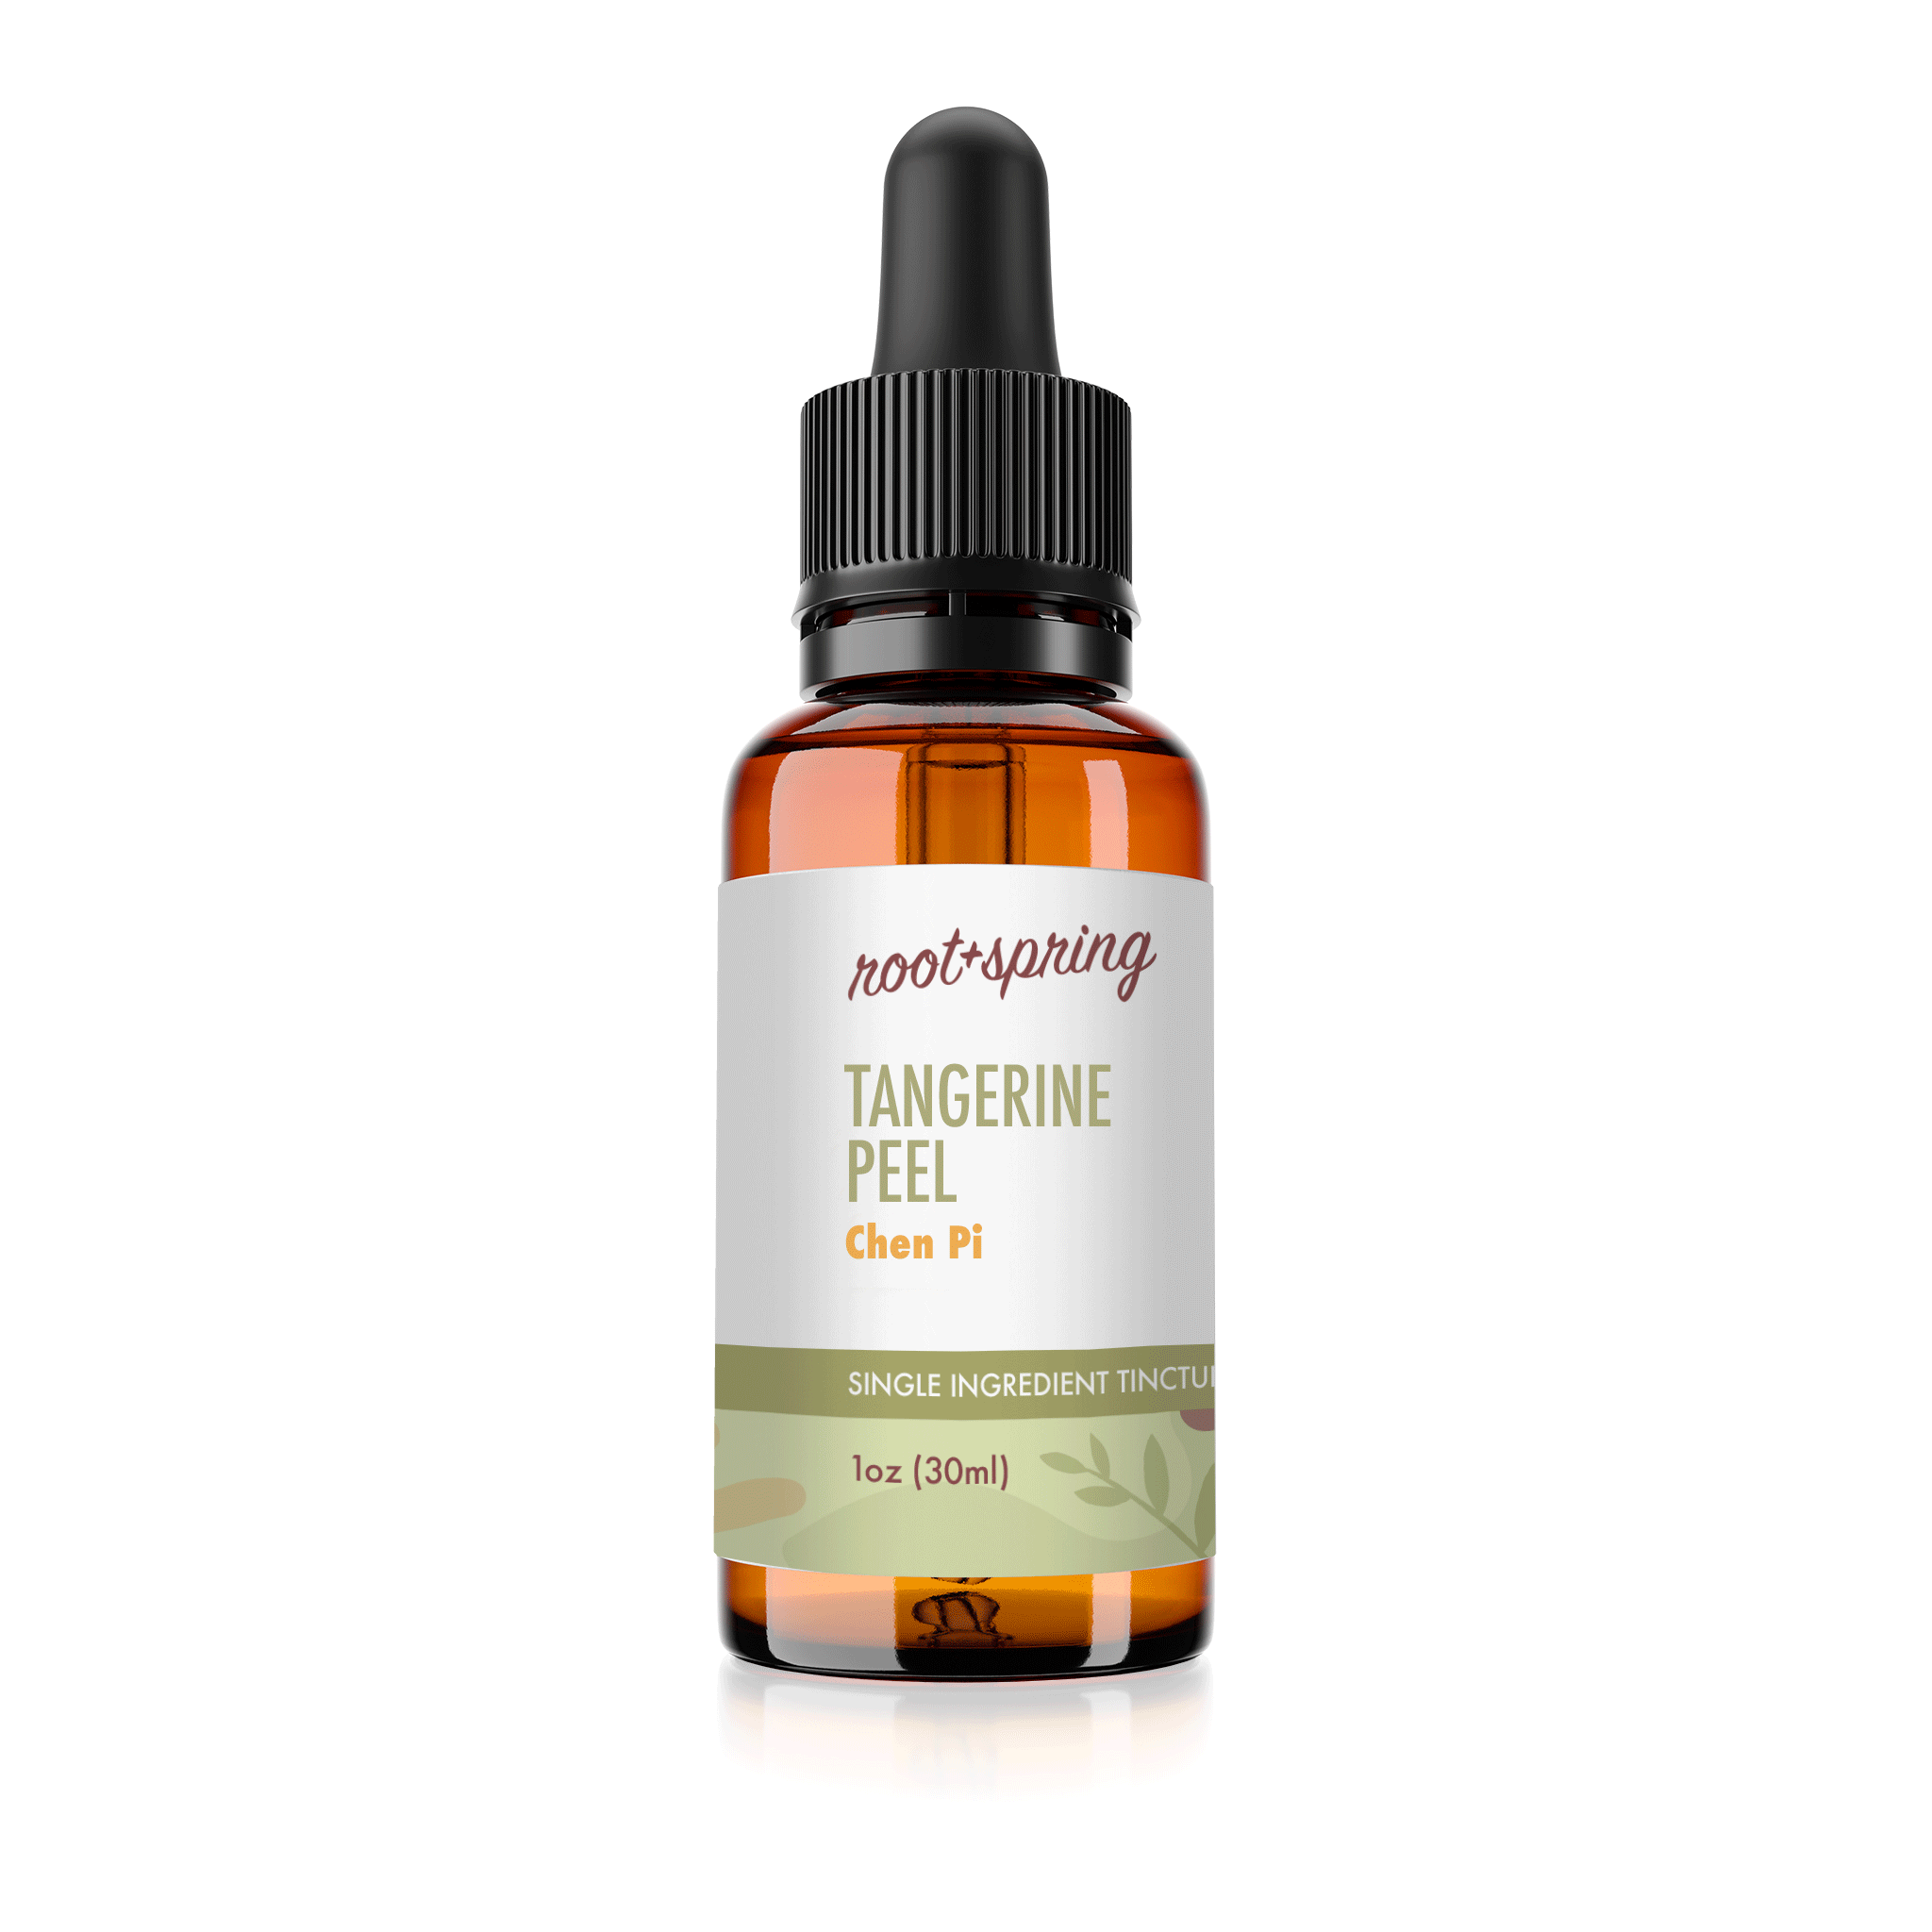 1 oz glass  bottle of Tangerine Peel, or Chen Pi, Herbal Tincture by root + spring. 